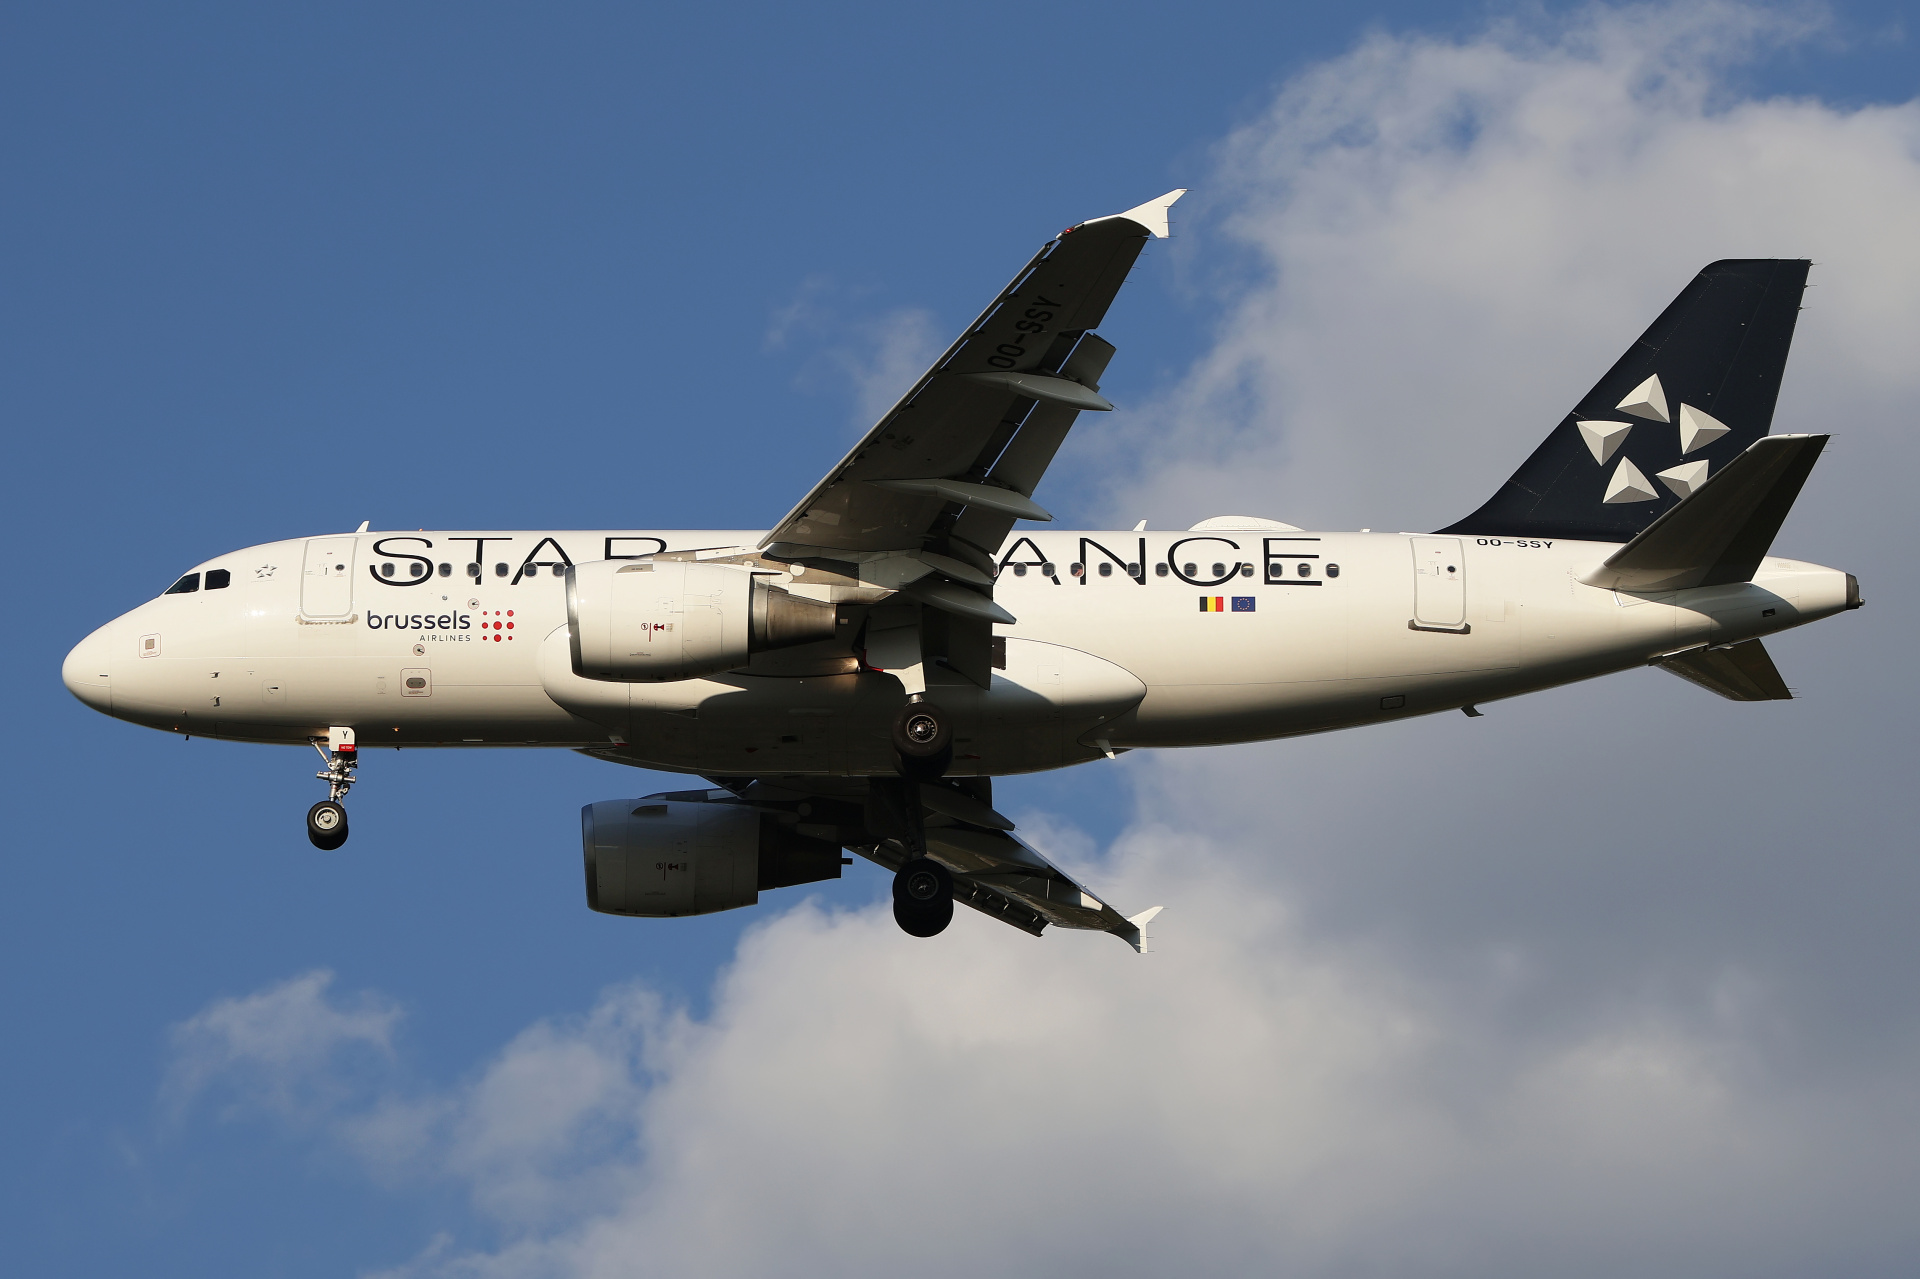 OO-SSY (Star Alliance livery) (Aircraft » EPWA Spotting » Airbus A319-100 » Brussels Airlines)